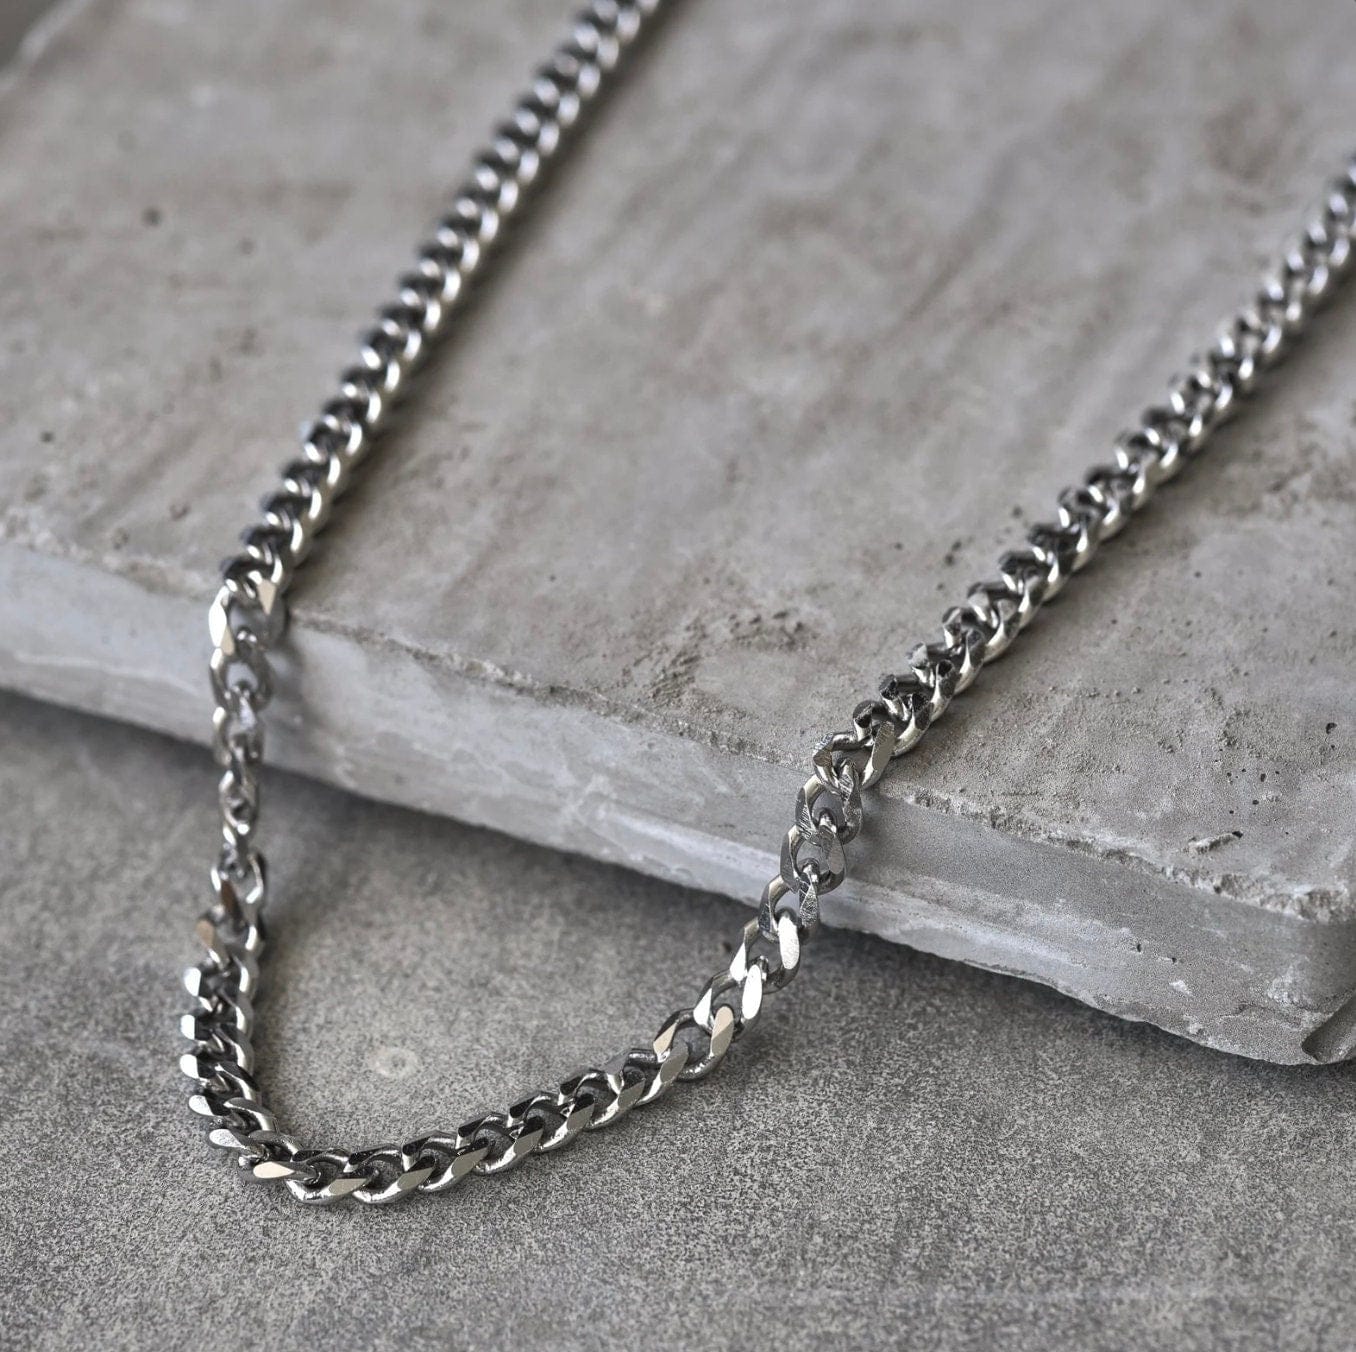 5MM Silver Cuban Link Chain Necklace for Men - 22in Stainless Steel Hip Hop Necklace - High Shine No Tarnish Water Resistant Layering Chain